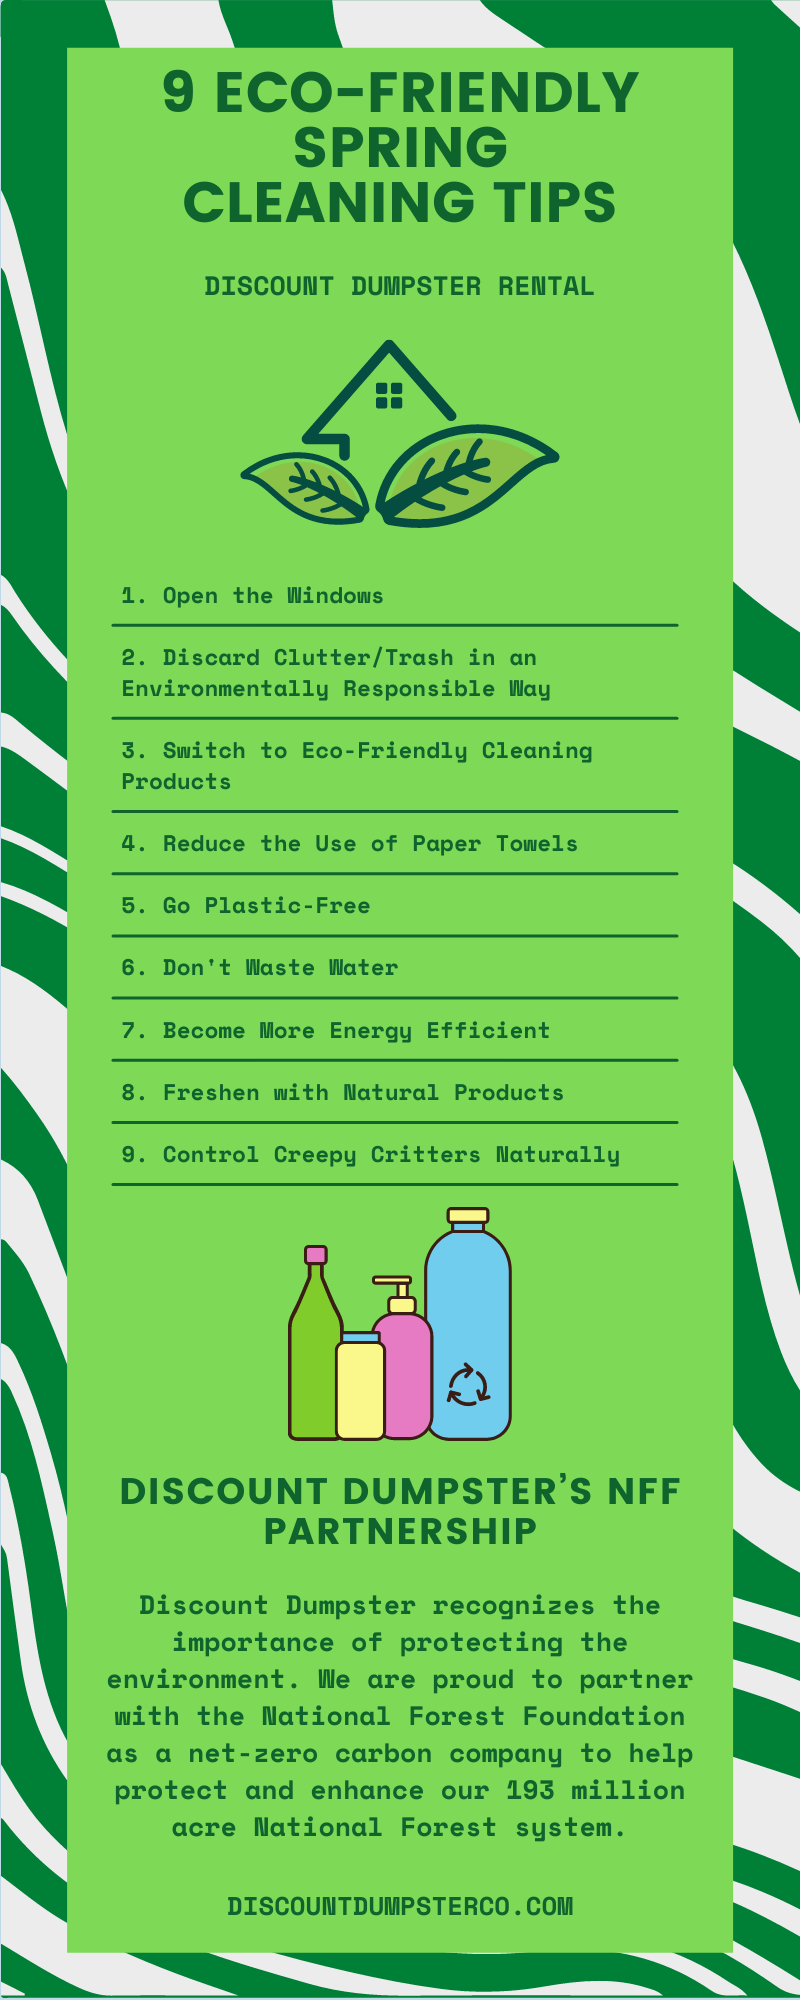 Efficient Cleaning Tips - arinsolangeathome